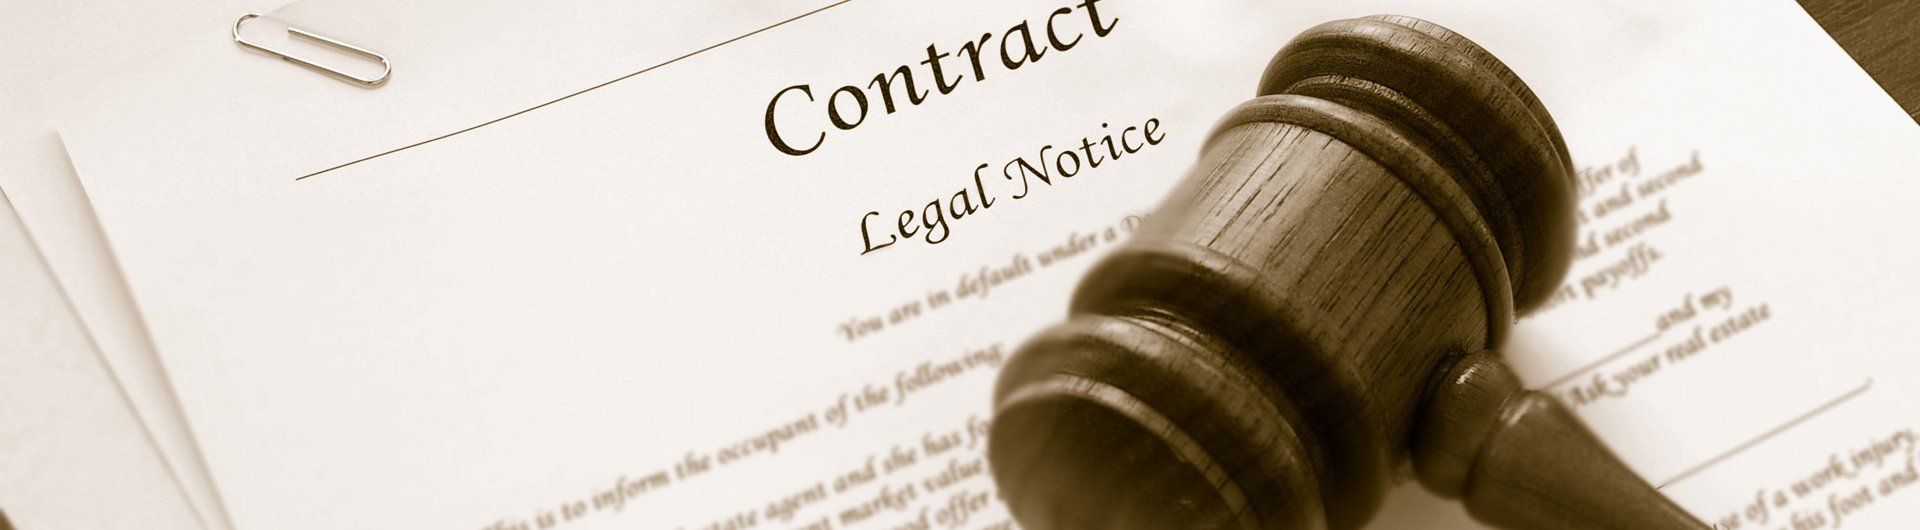 Contract document and gavel